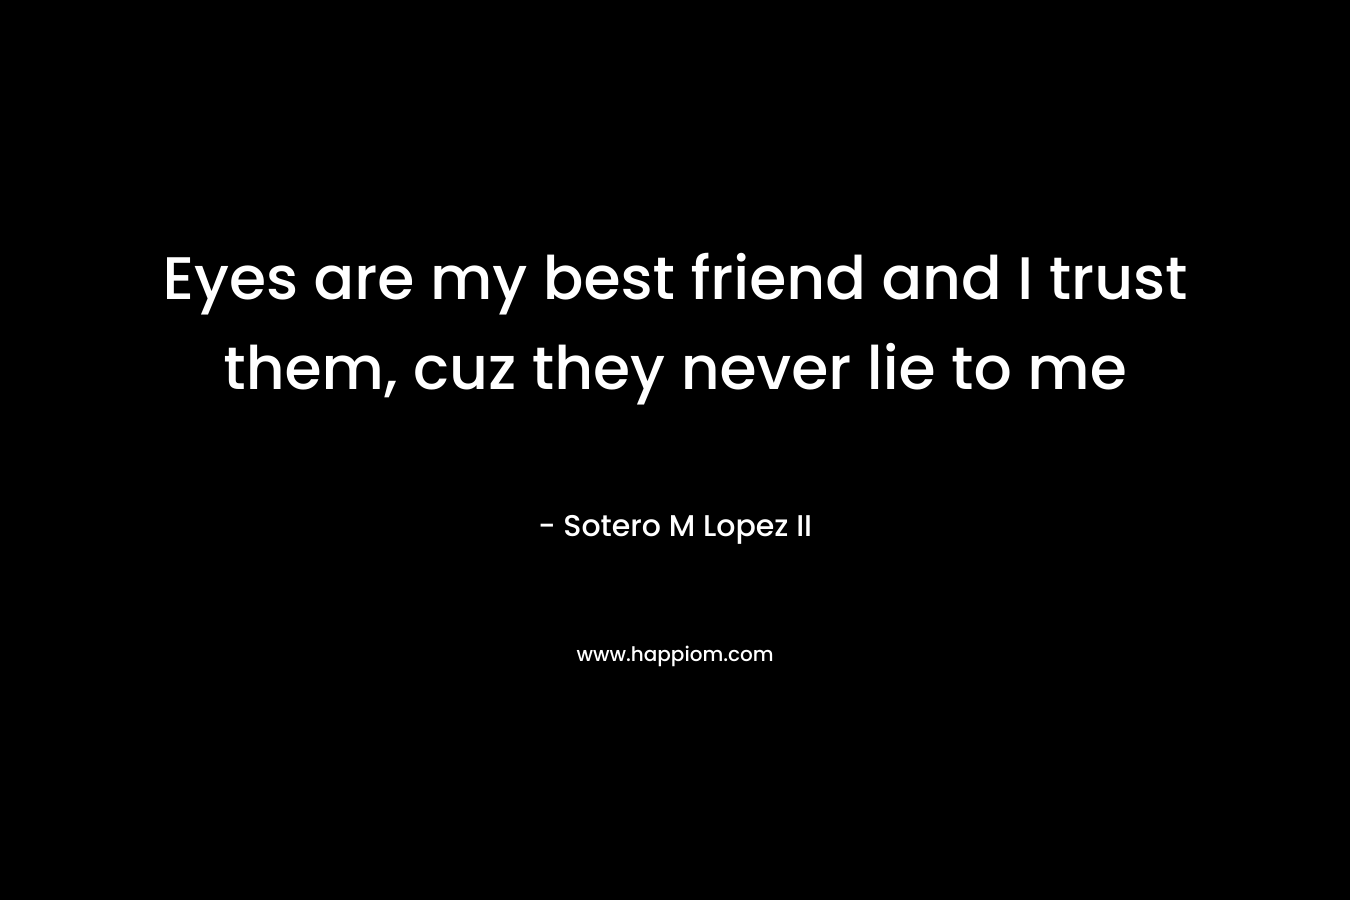 Eyes are my best friend and I trust them, cuz they never lie to me – Sotero M Lopez II